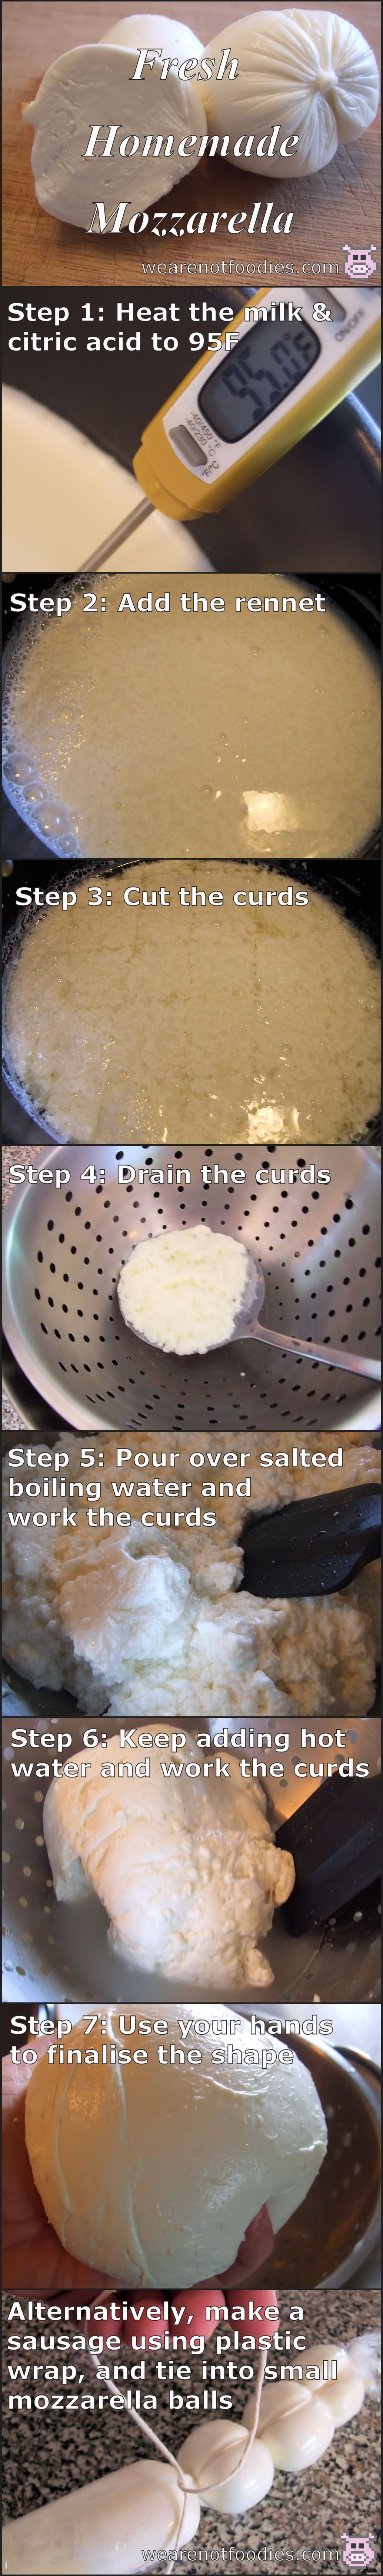 Step by step guide to making homemade mozzarella